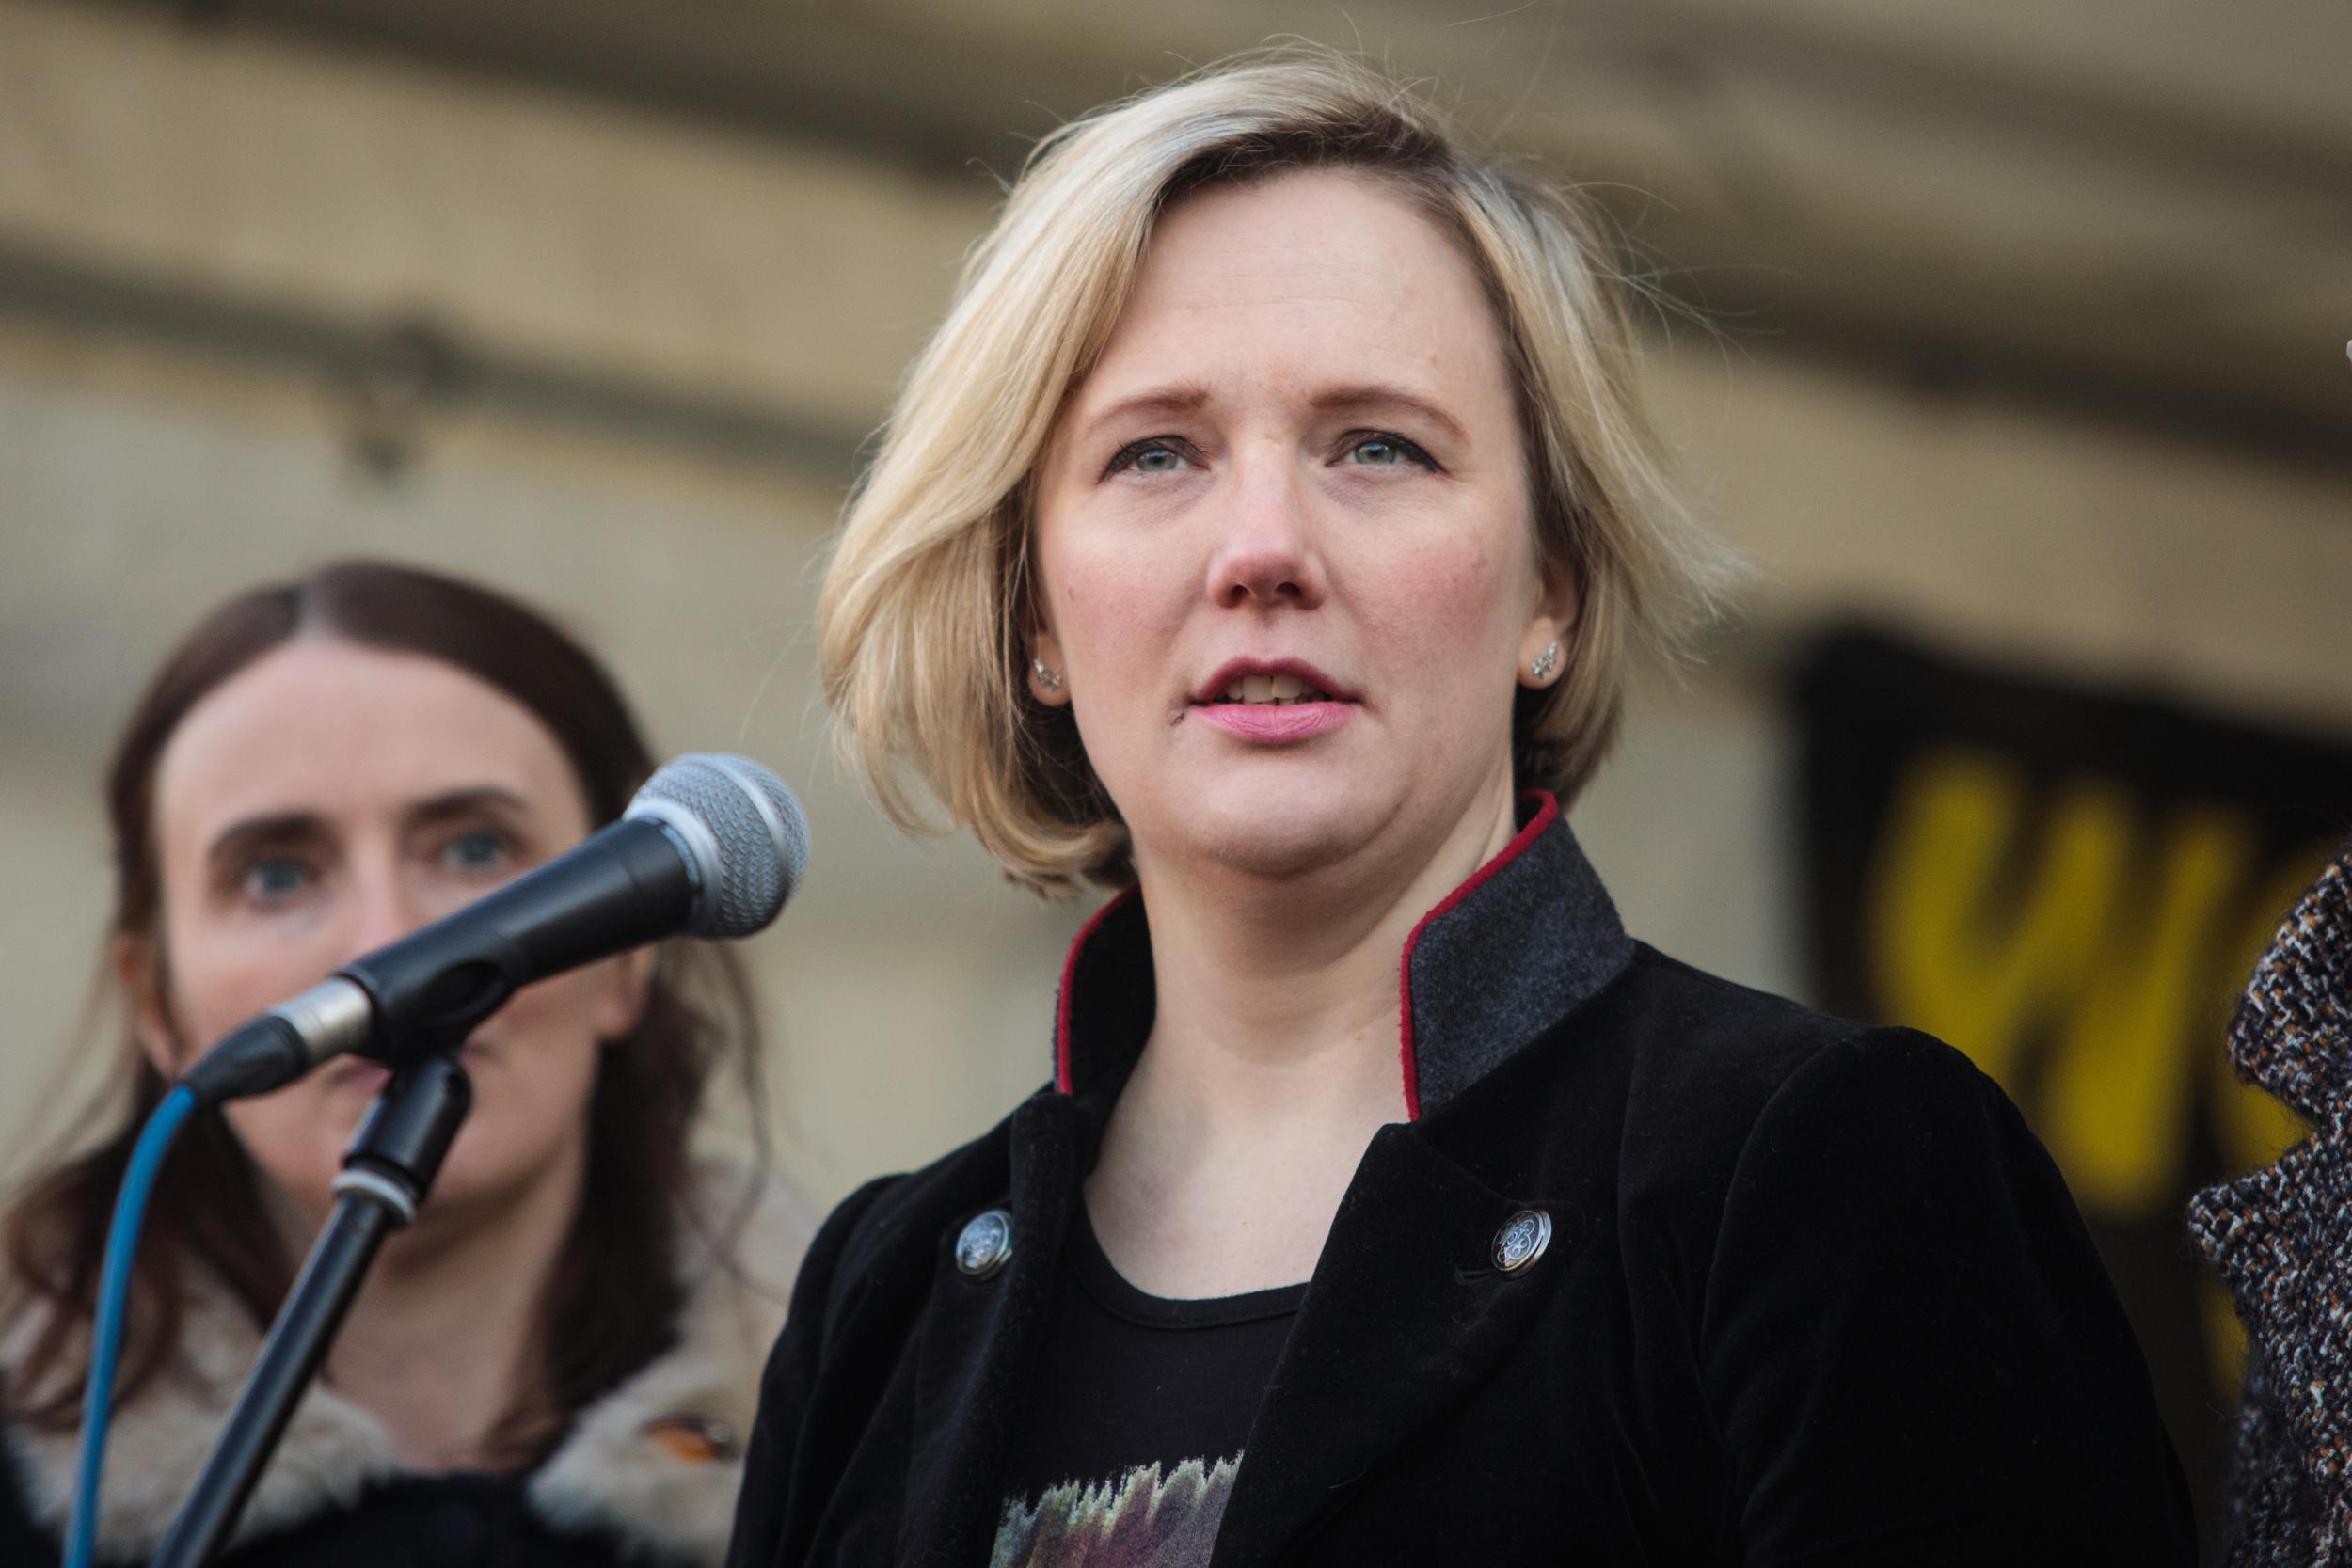 Labour MP for Walthamstow, Stella Creasy, speaks in Trafalgar Square during the Women's March on January 21, 2017 in London, England. (Getty Images)